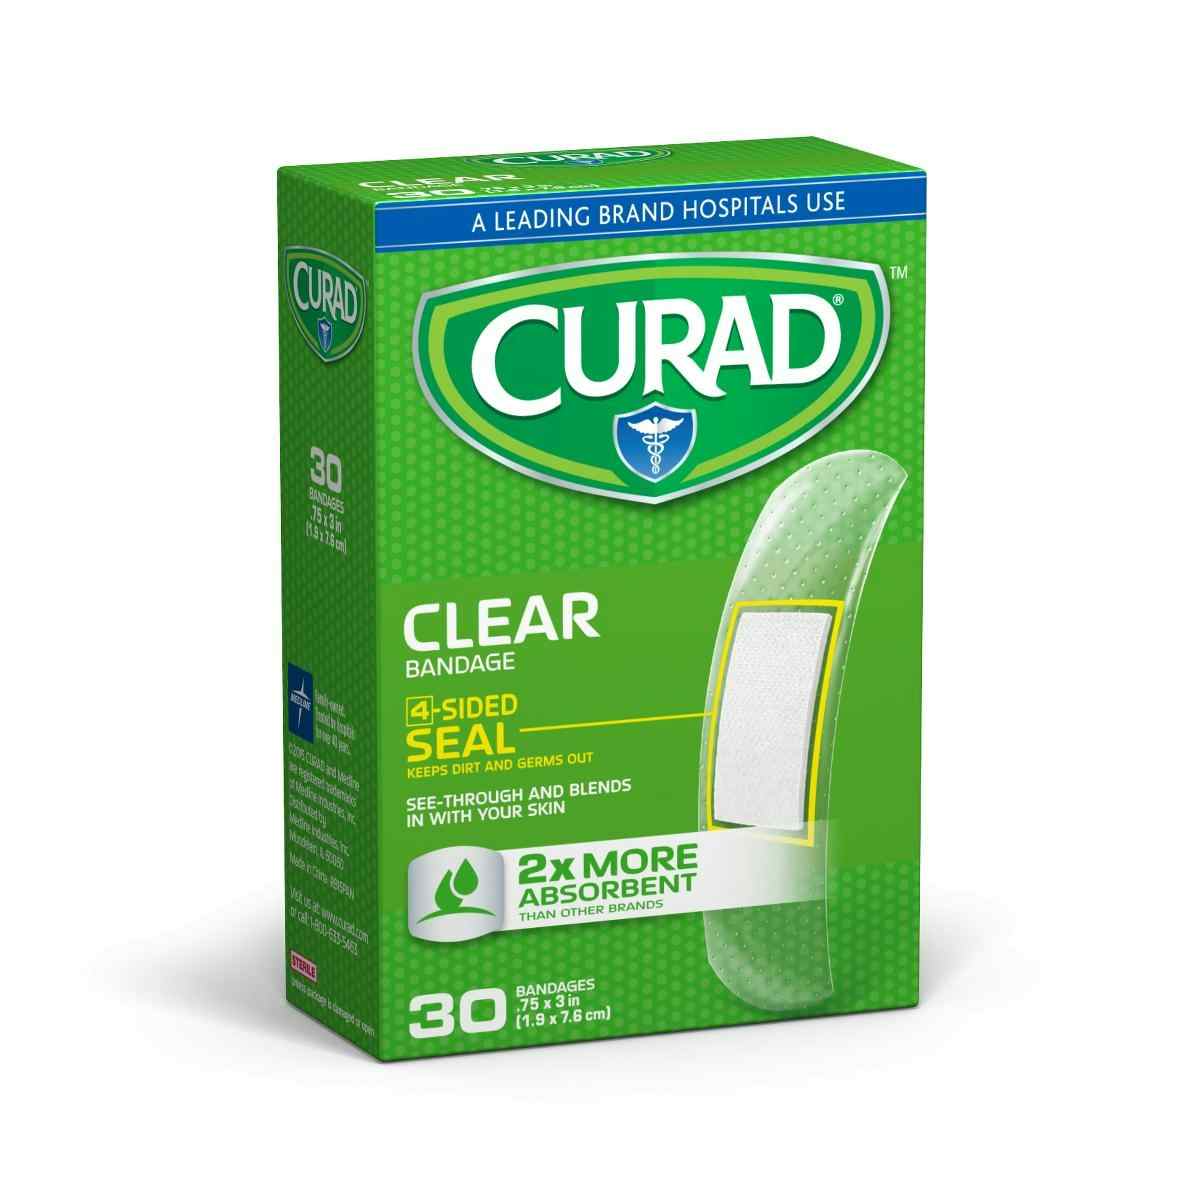 Curad Clear Adhesive Bandages, CUR44010RBH, 3/4" X 3" - Box of 30